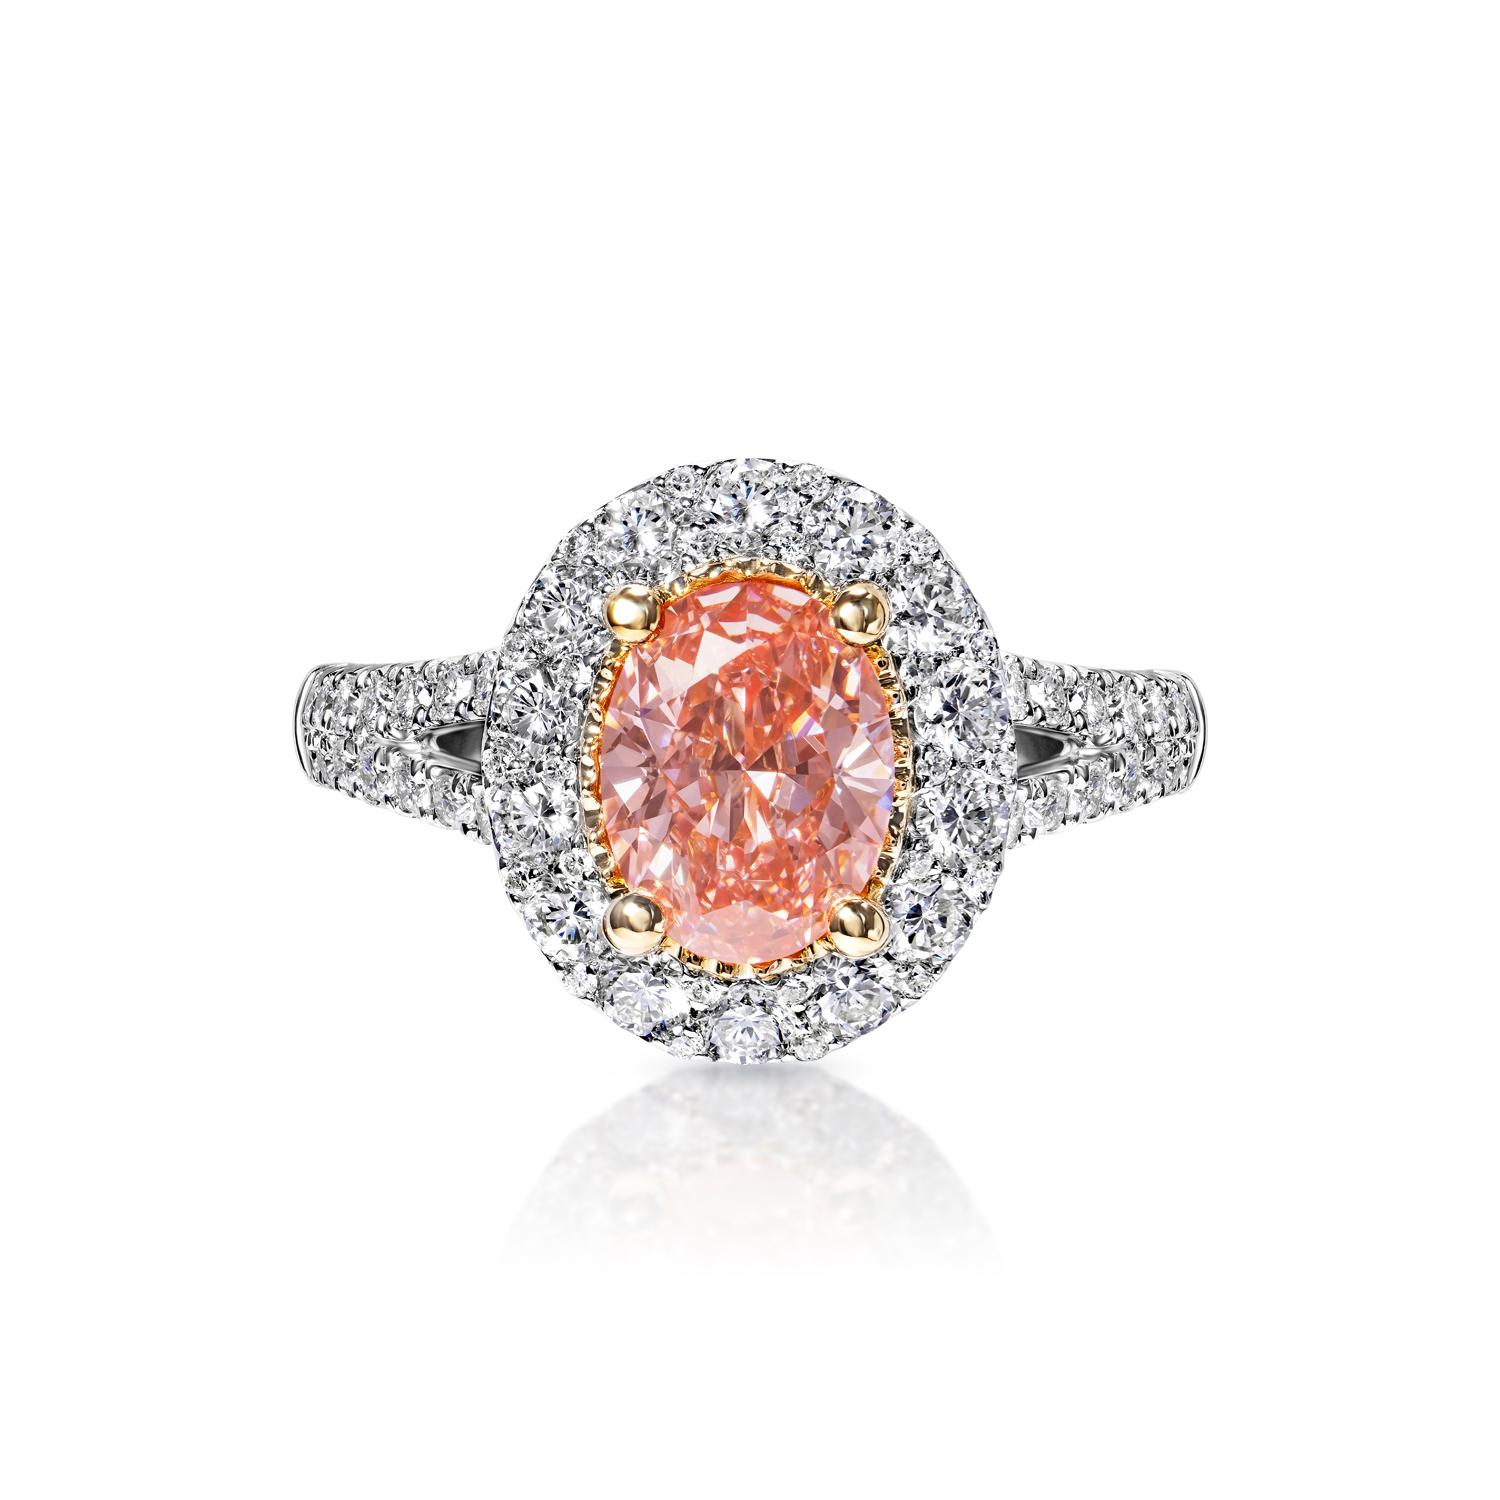 GIA Certified

Earth Mined Center Diamond:
Carat Weight: 1.20 Carat
Color: Fancy Vivid Pink*
Clarity: VS1
Style: Oval Cut

*This Diamond has been treated by one or more processes to change its color

Carat Weight: 0.87 Carat
Shape: Round Brilliant